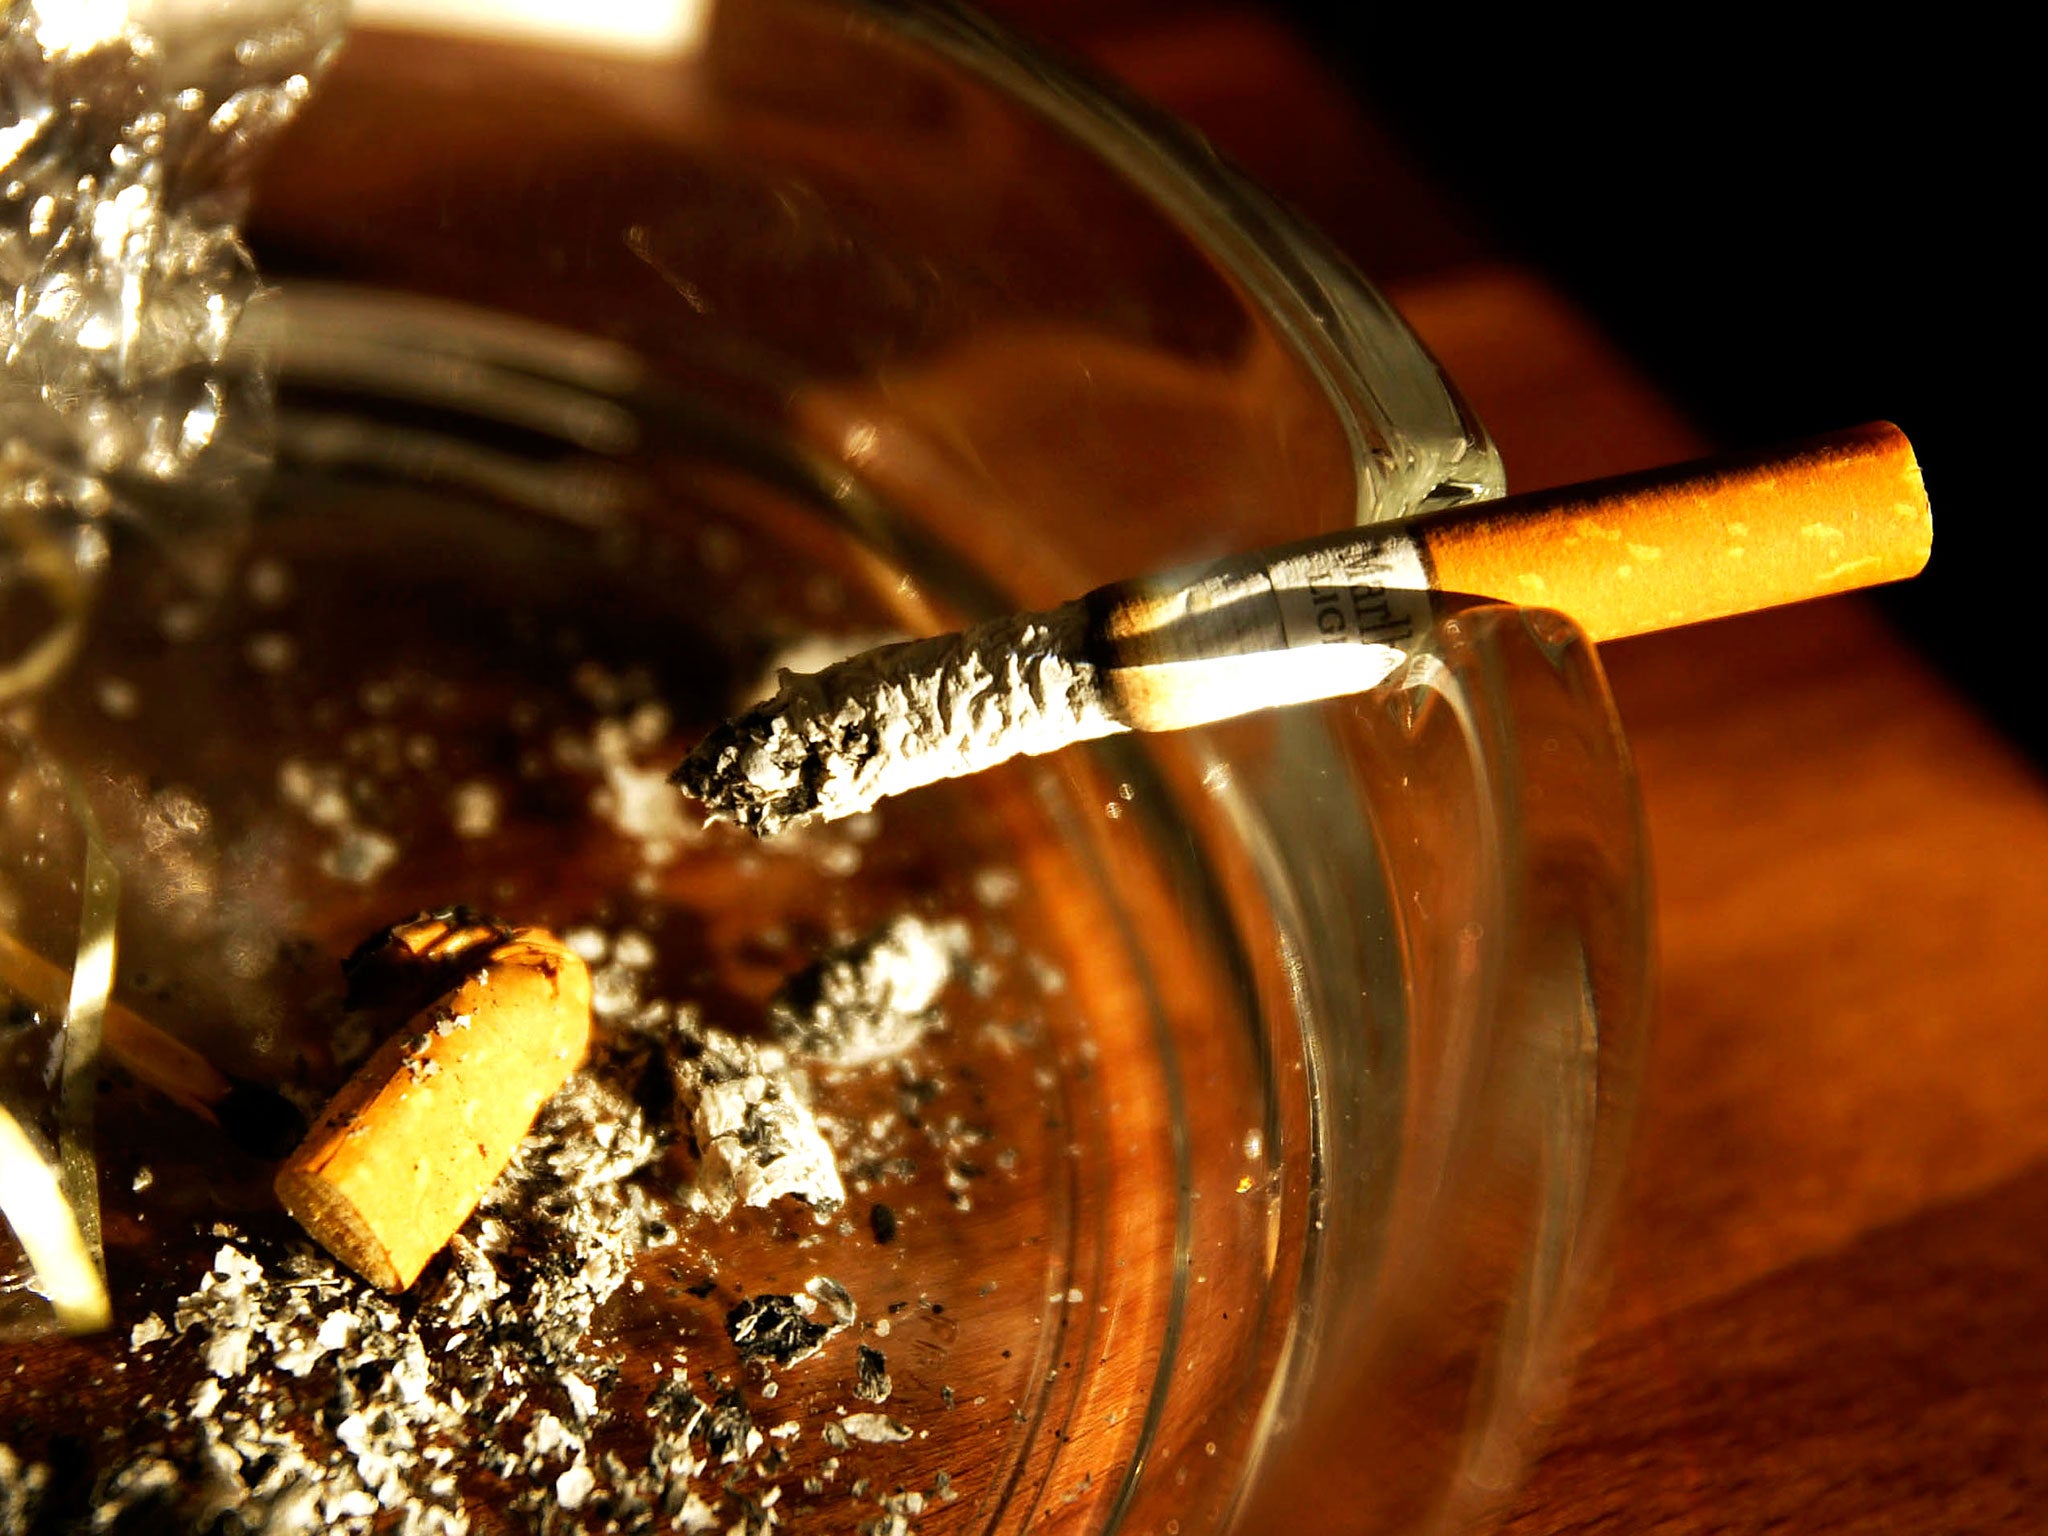 Ash: Action on Smoking and Health, the anti-smoking campaign group